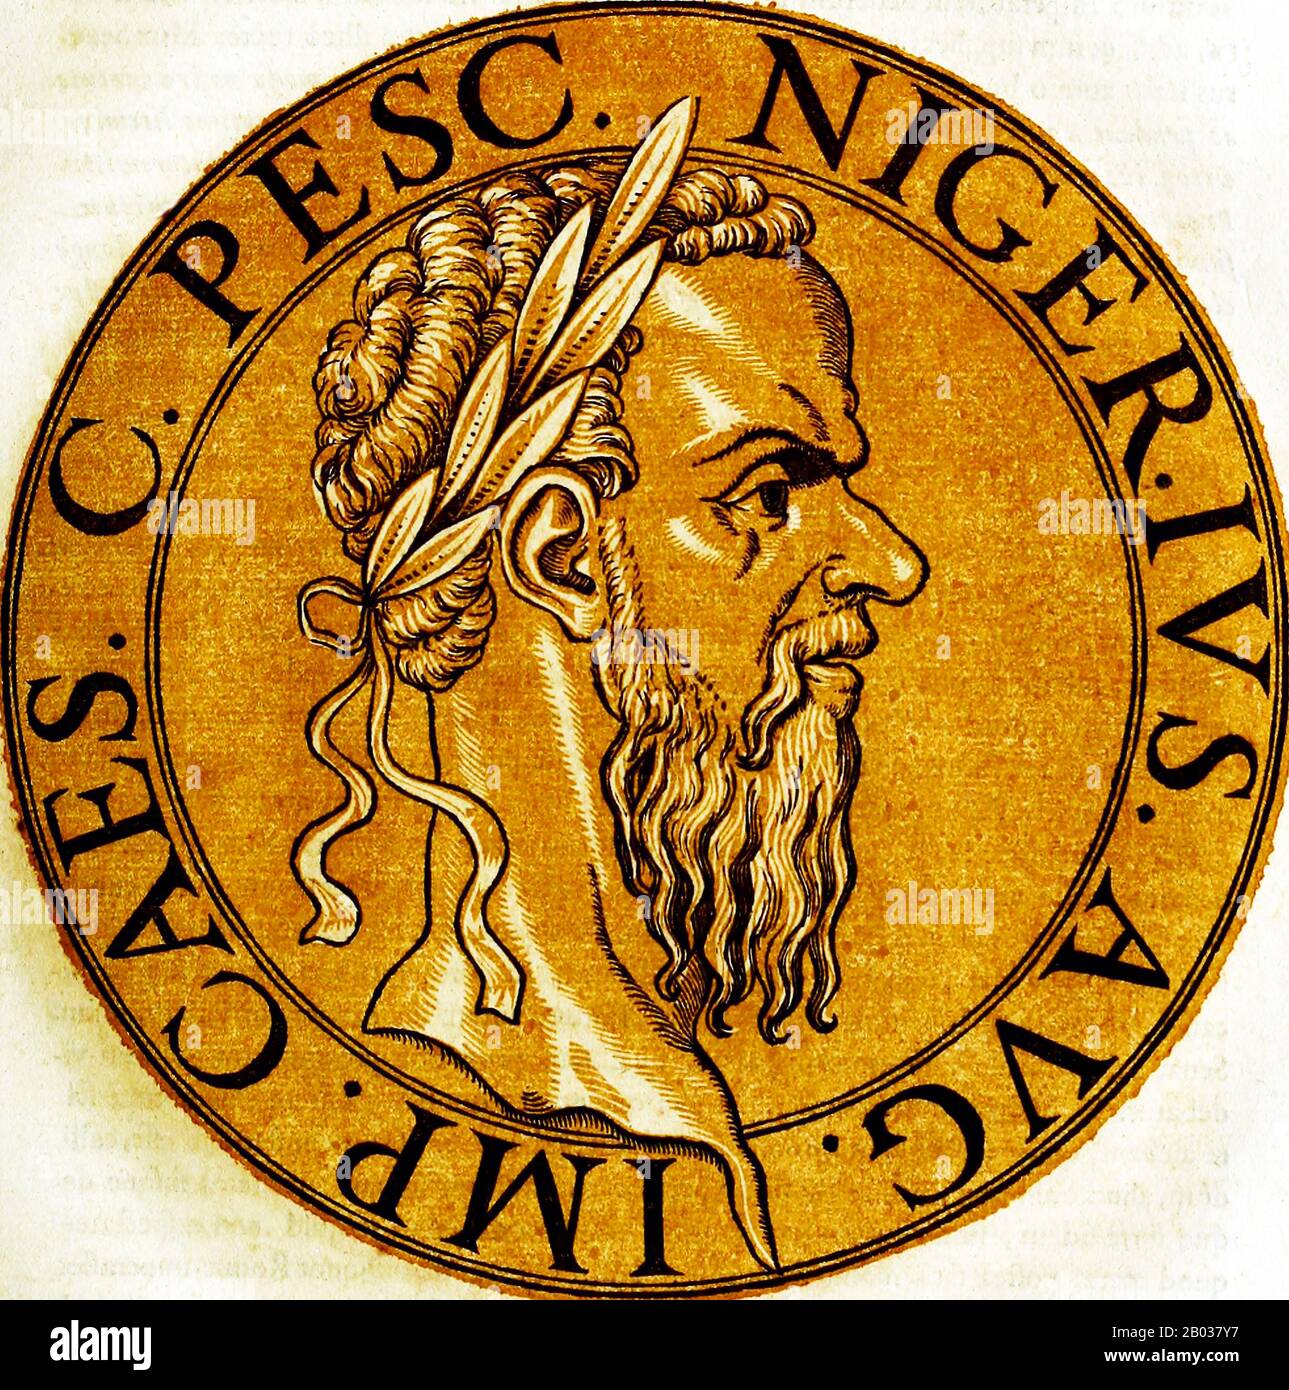 Pescennius Niger (135/140-194) was born into an old Italian equestrian family, and was the first member to become a Roman senator. He was appointed by Commodus to be imperial legate of Syria in 191, where he was serving when news came of the murder of Pertinax in 193 and the auctioning of the imperial throne to Didius Julianus.  Niger was a well regarded public figure, and the citizens of Rome called out for him to return to Rome and claim the title from Julianus. Consequently, the eastern legions proclaimed Niger as emperor in 193, the second emperor to claim the imperial title after Septimiu Stock Photo